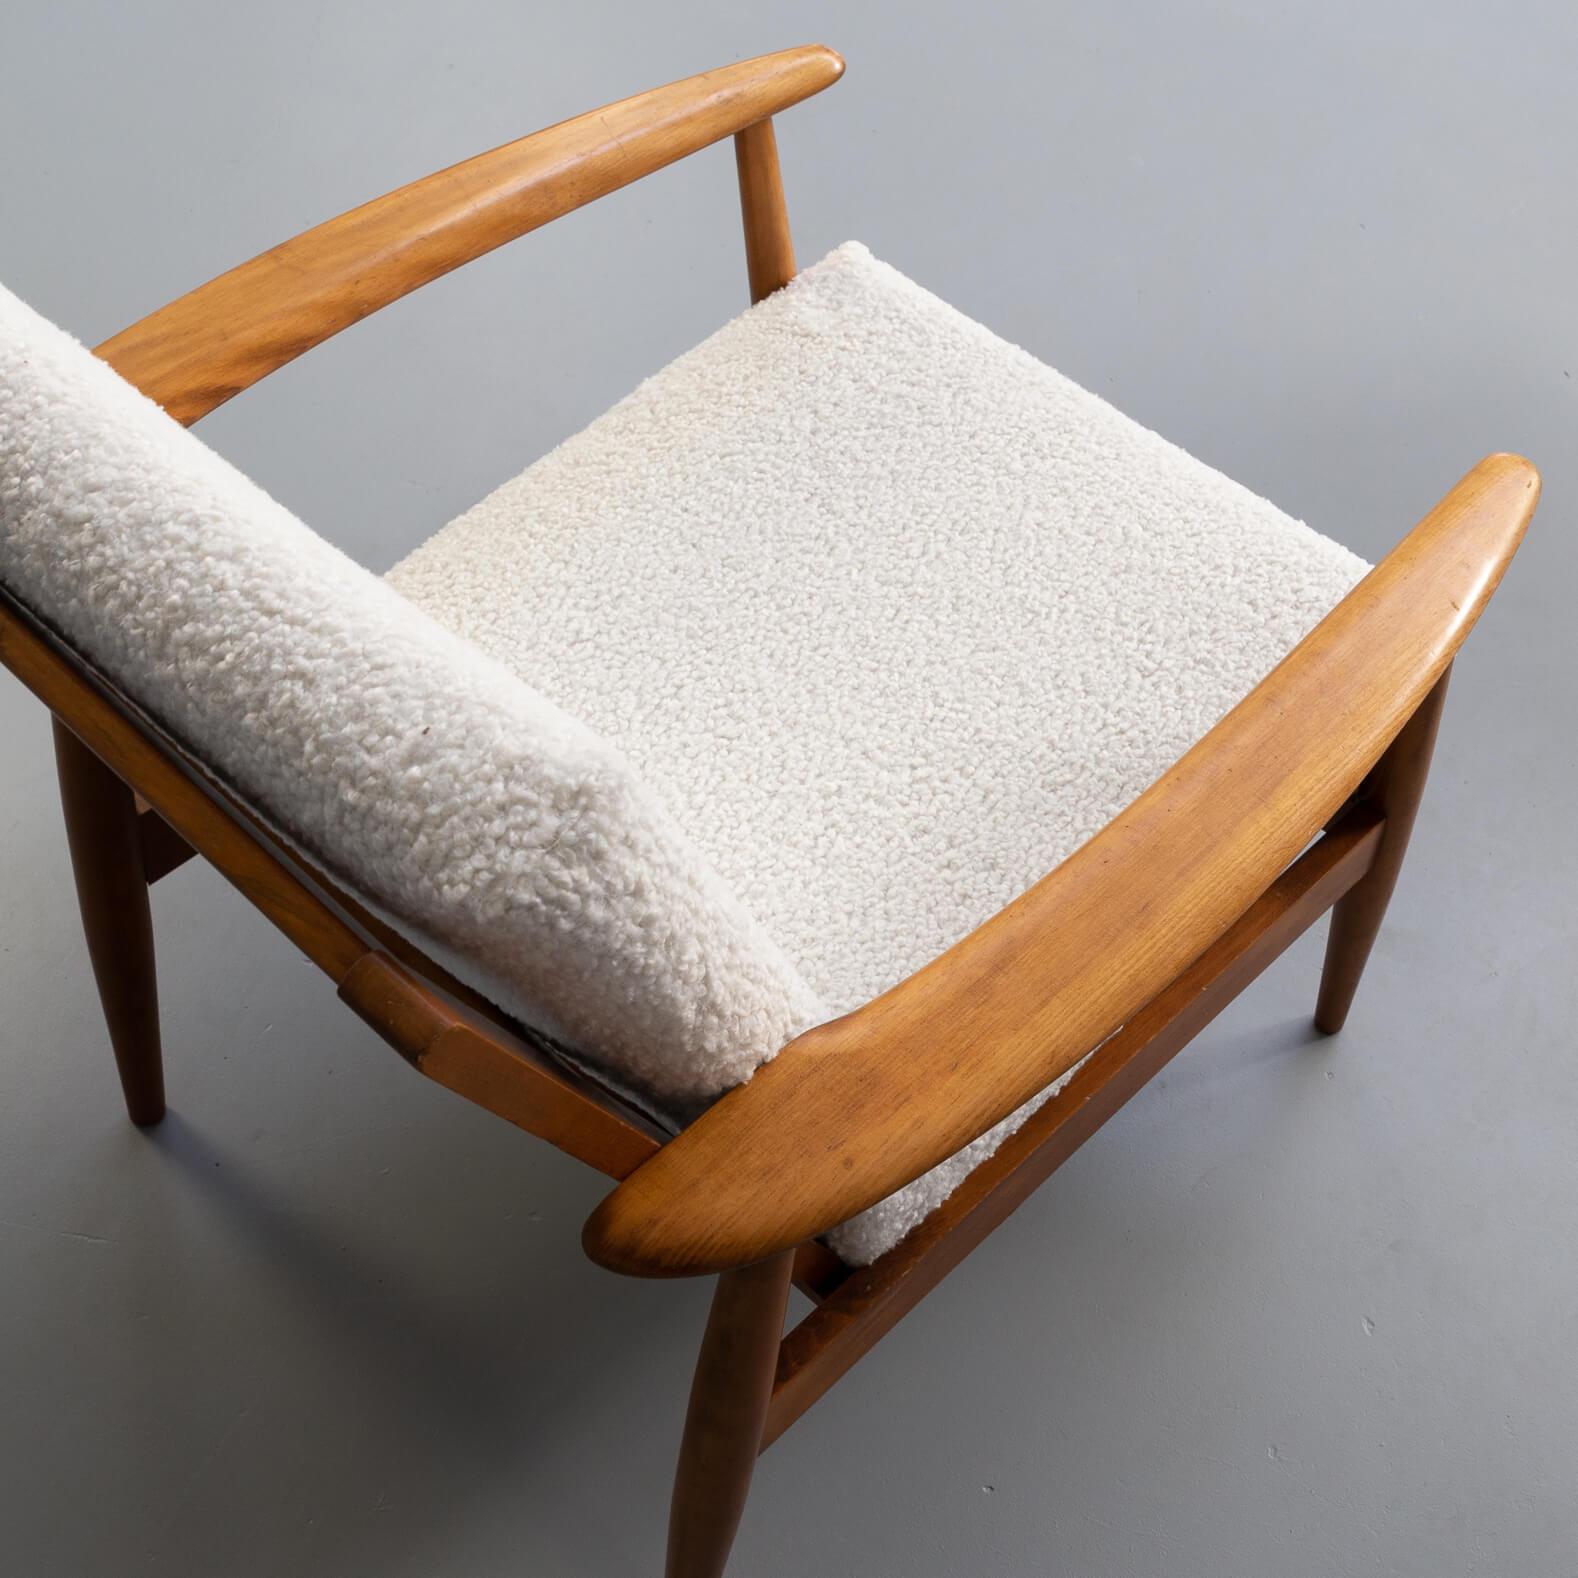 60s Teak Lounge Fauteuil with New Woolen ‘Teddy’ Fabric For Sale 2